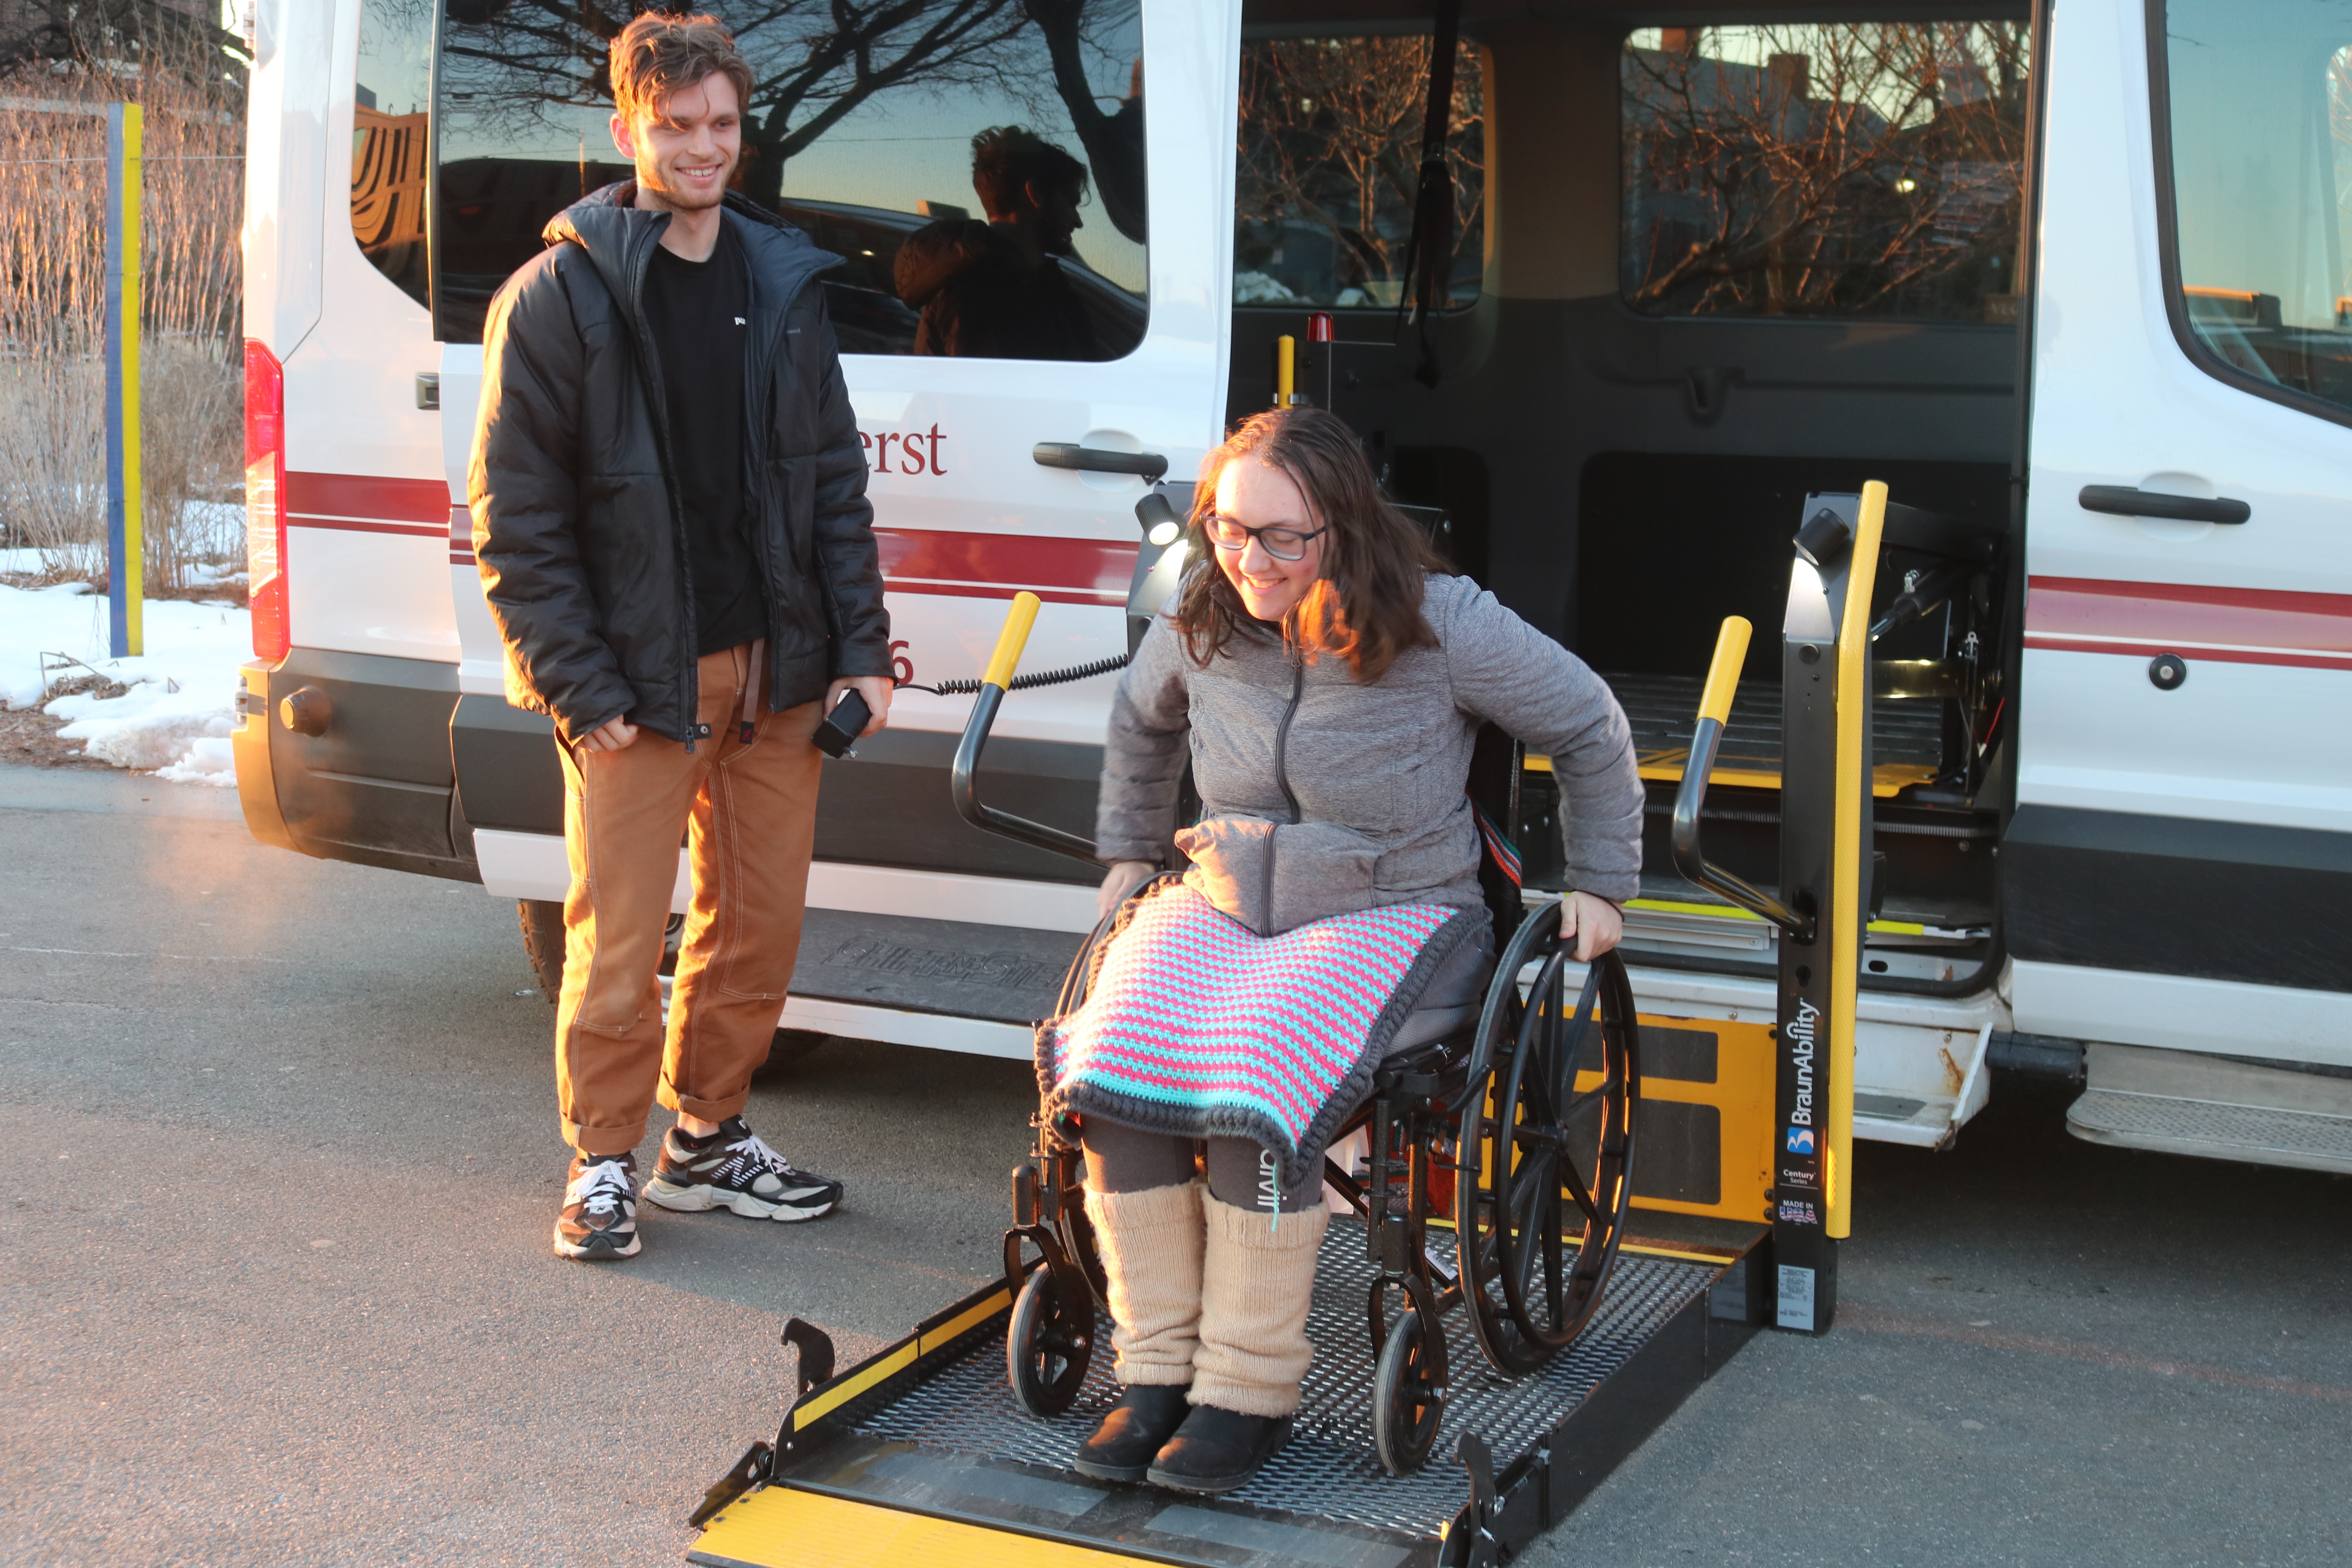 Passenger uses lift to exit accessible van